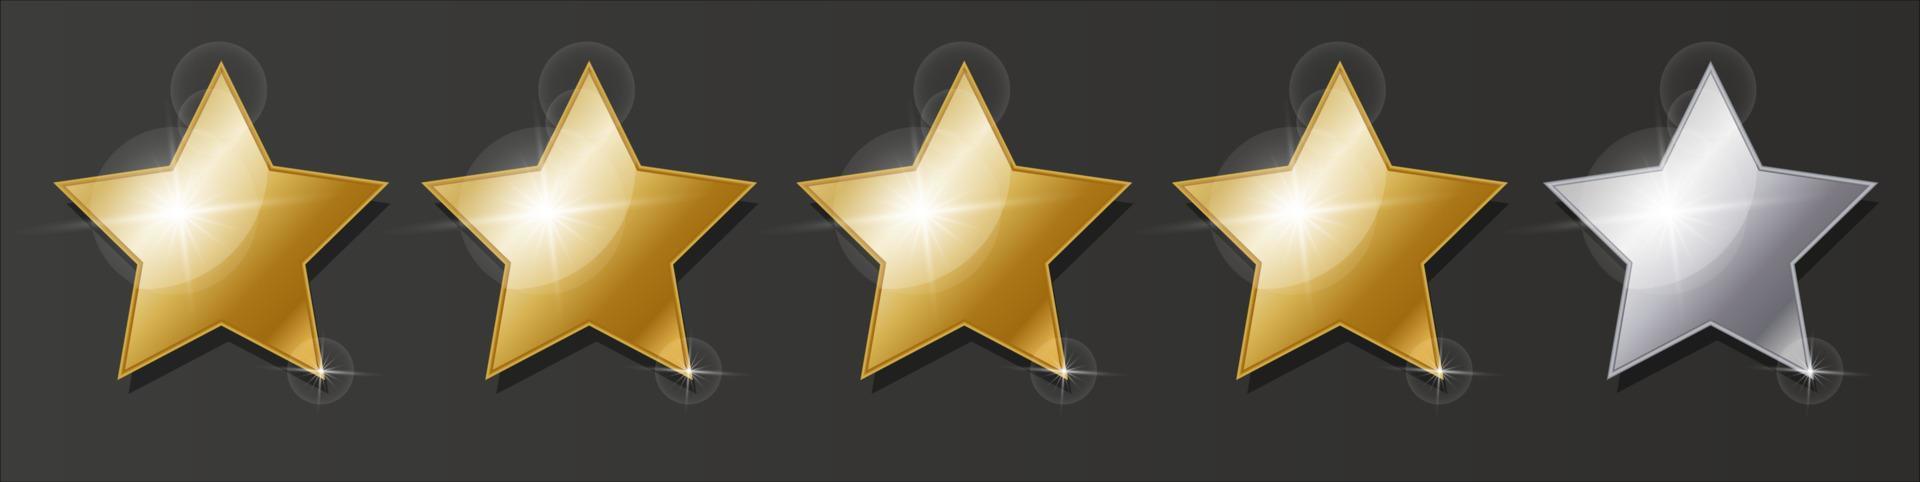 Four rating stars icon vector